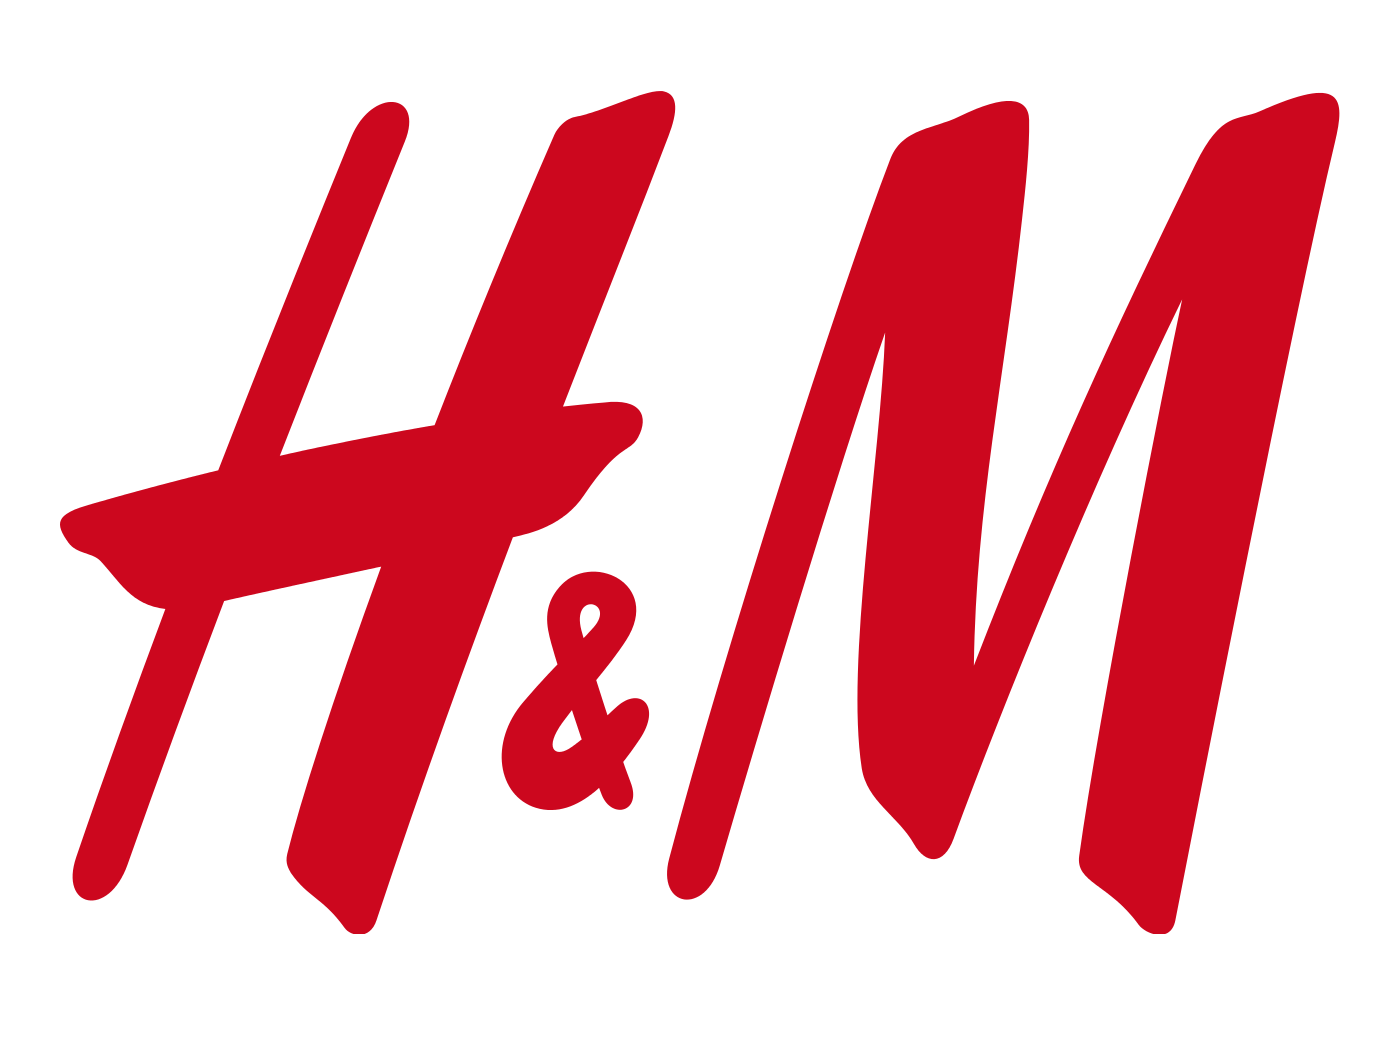 Red Globe Company Logo - H&M Logo, H&M Symbol Meaning, History and Evolution